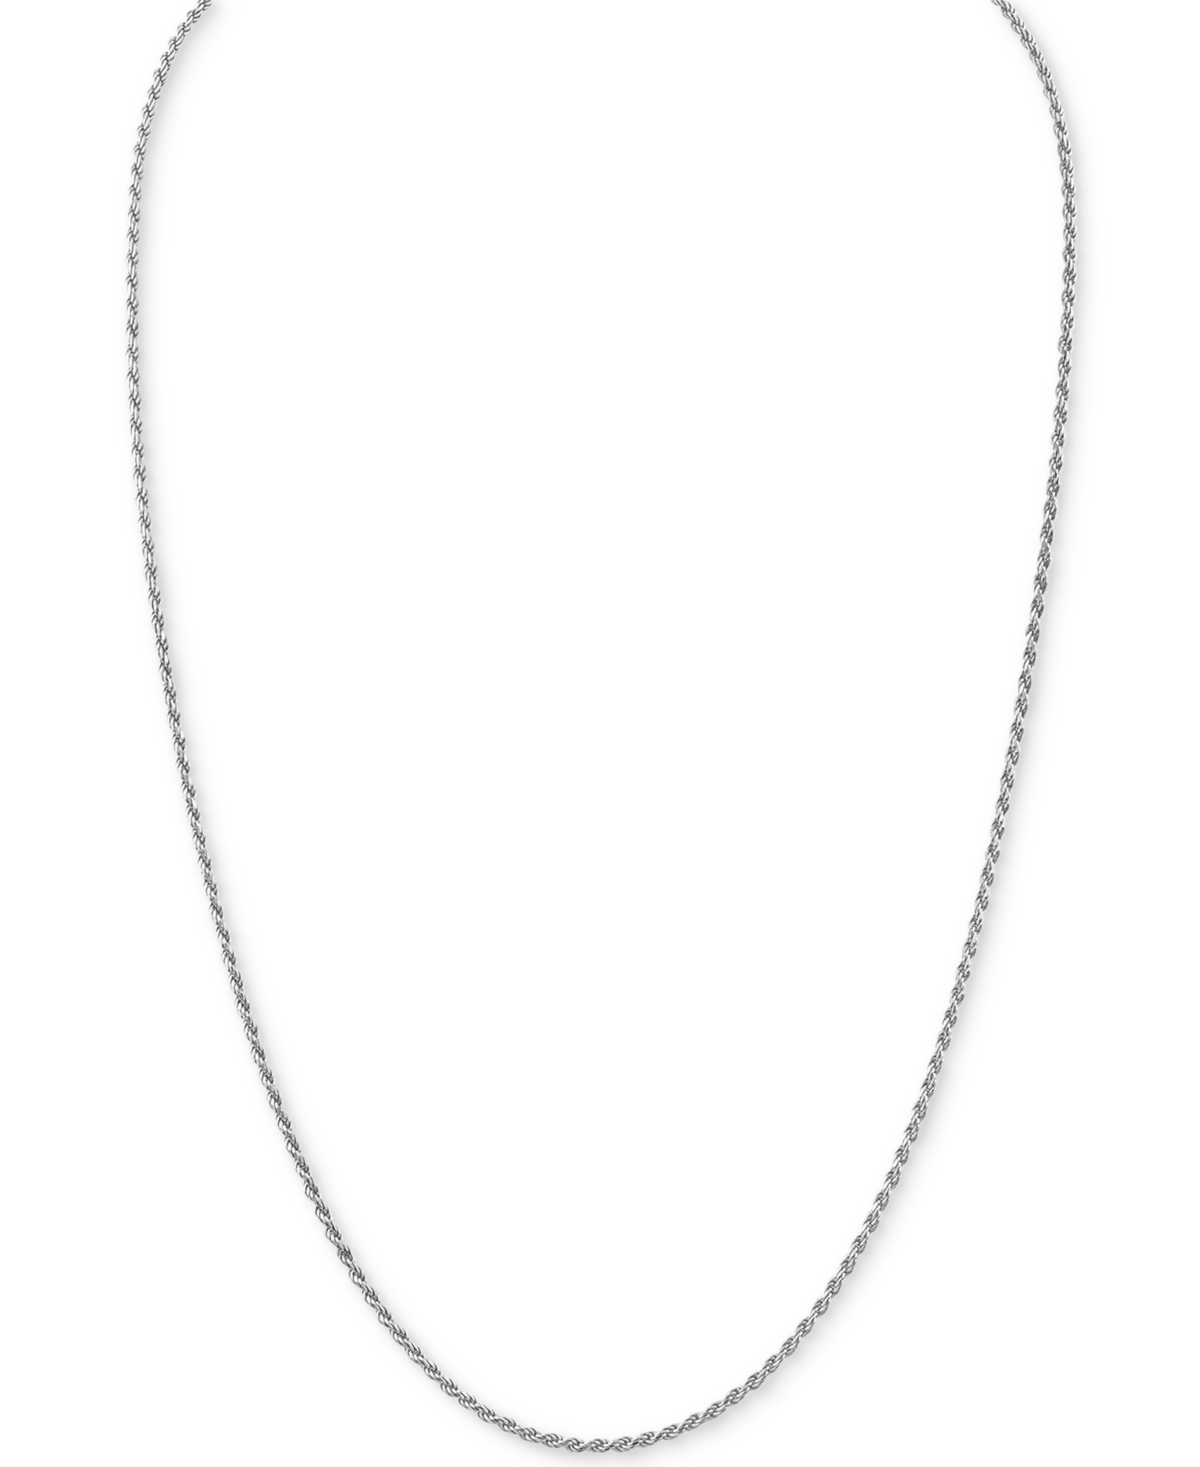 Esquire Men's Jewelry Rope Link 24" Chain Necklace, Created for Macy's